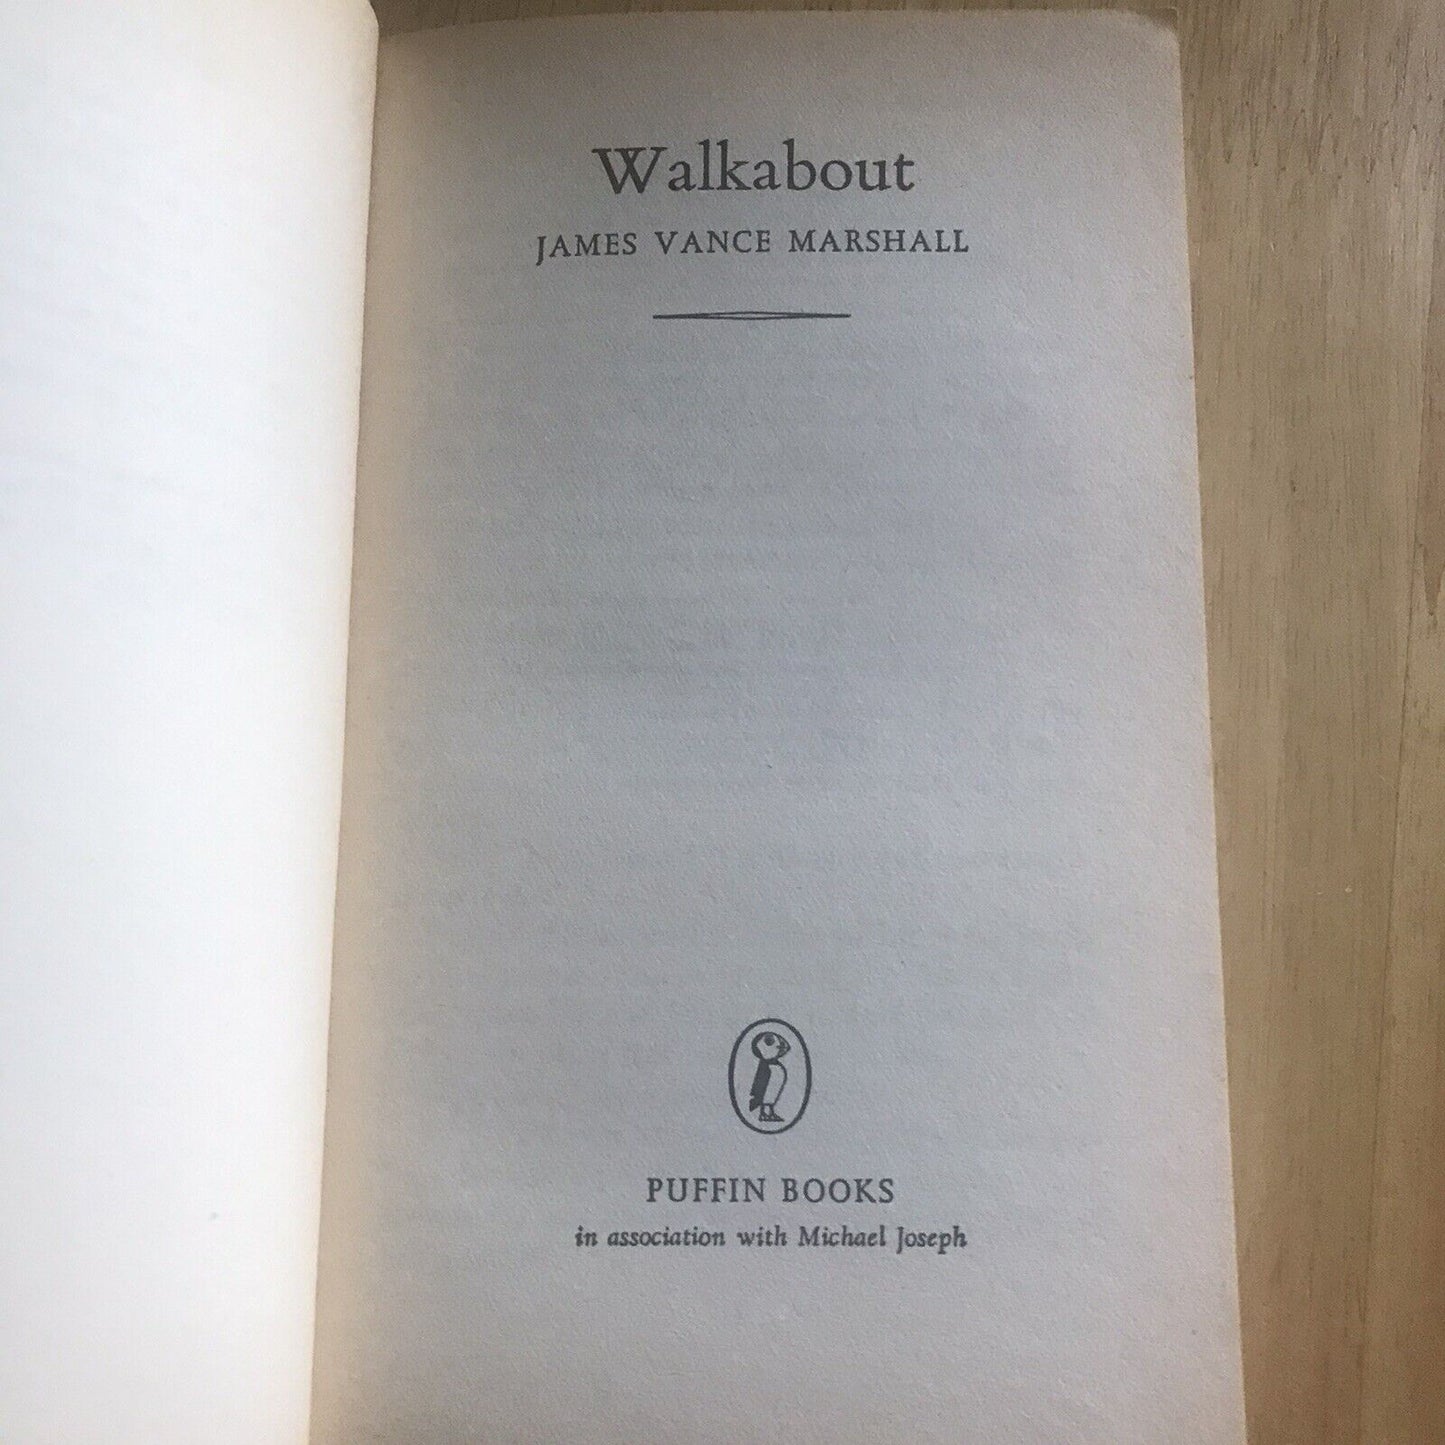 Walkabout by James Vance Marshall (Paperback, 1979)